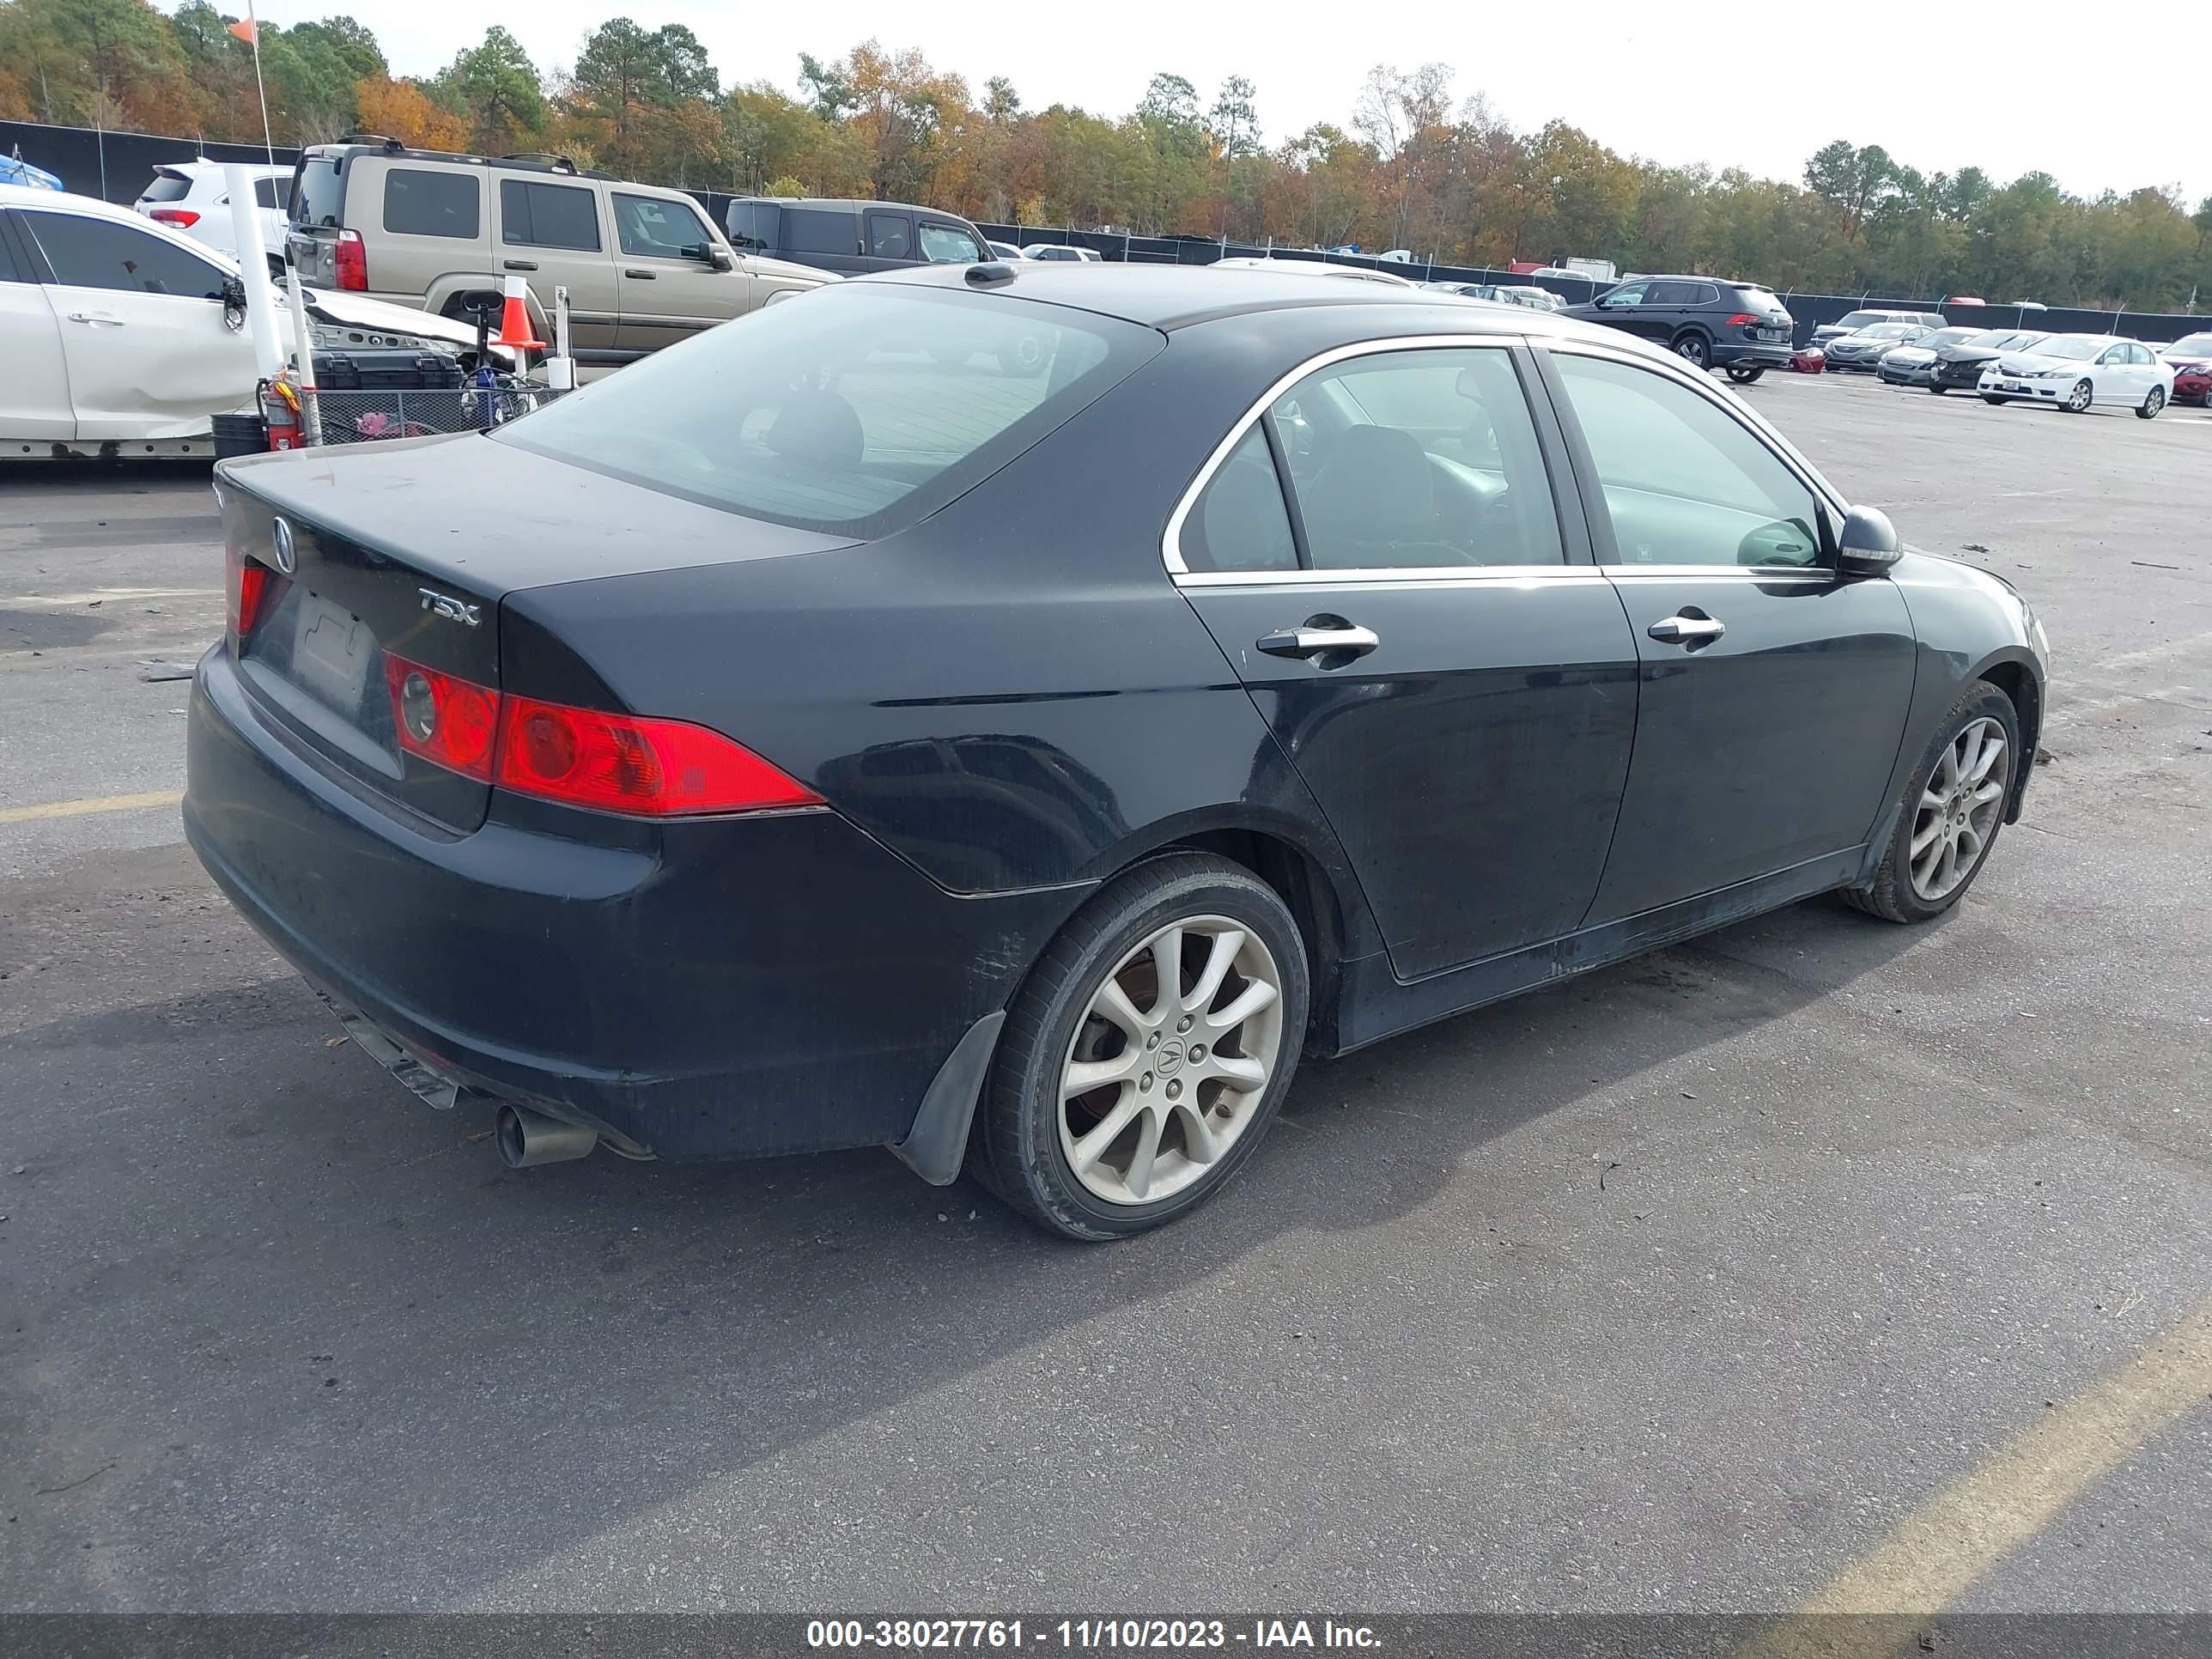 JH4CL96836C014213  - ACURA TSX  2006 IMG - 3